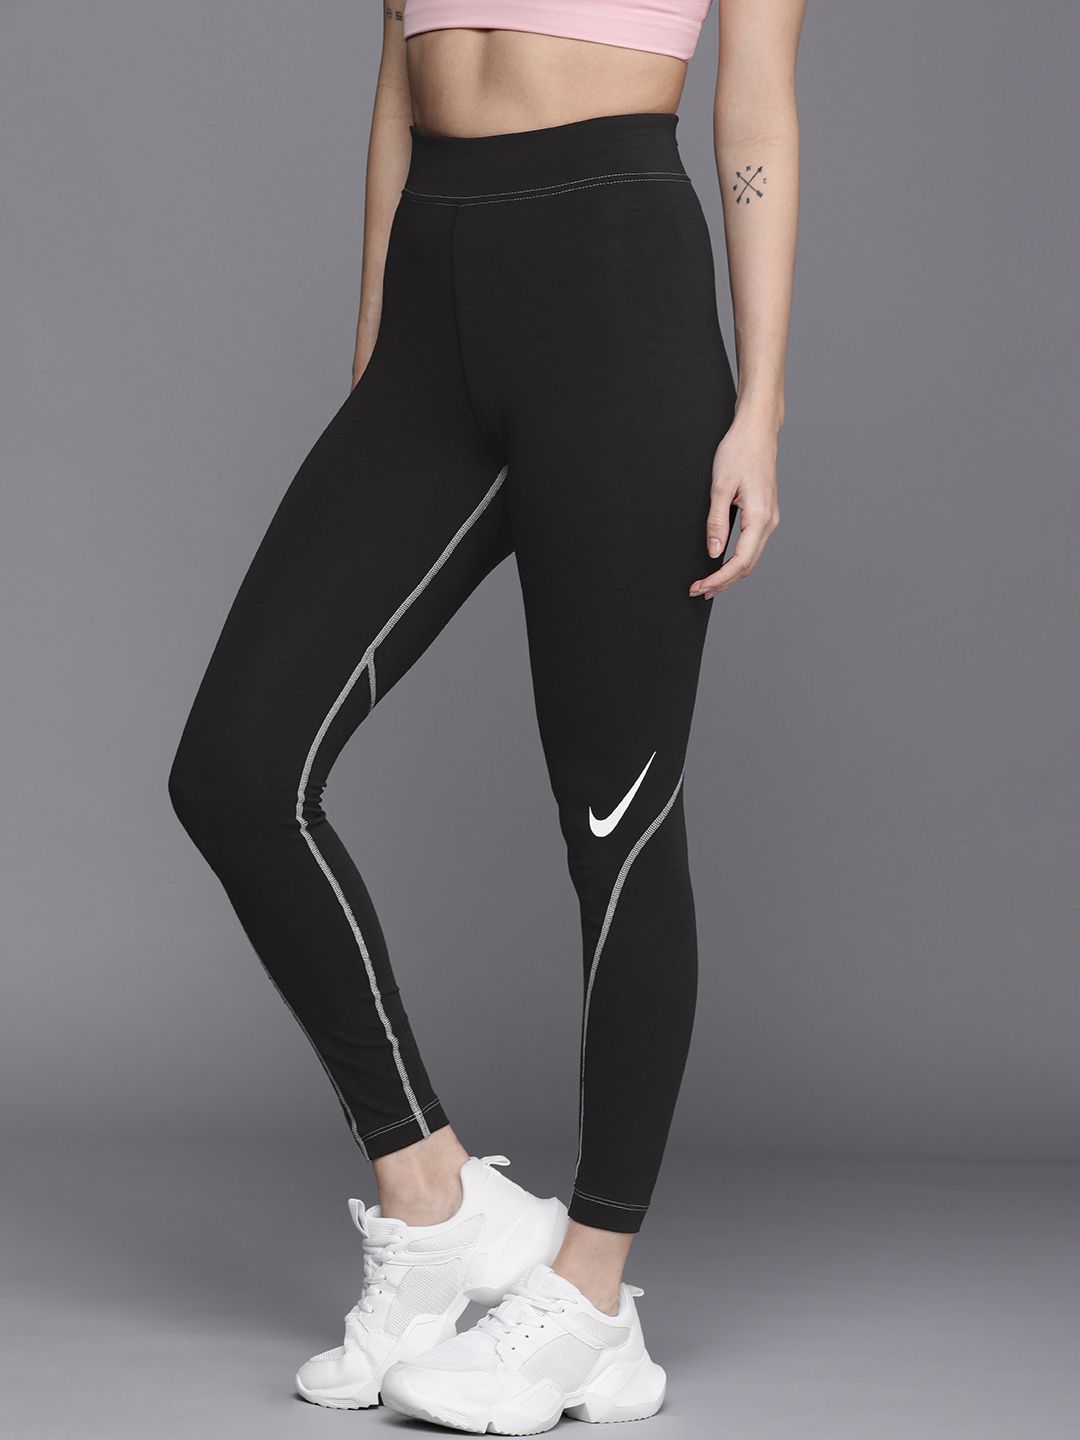 Nike Women Black & White Solid Tights Price in India